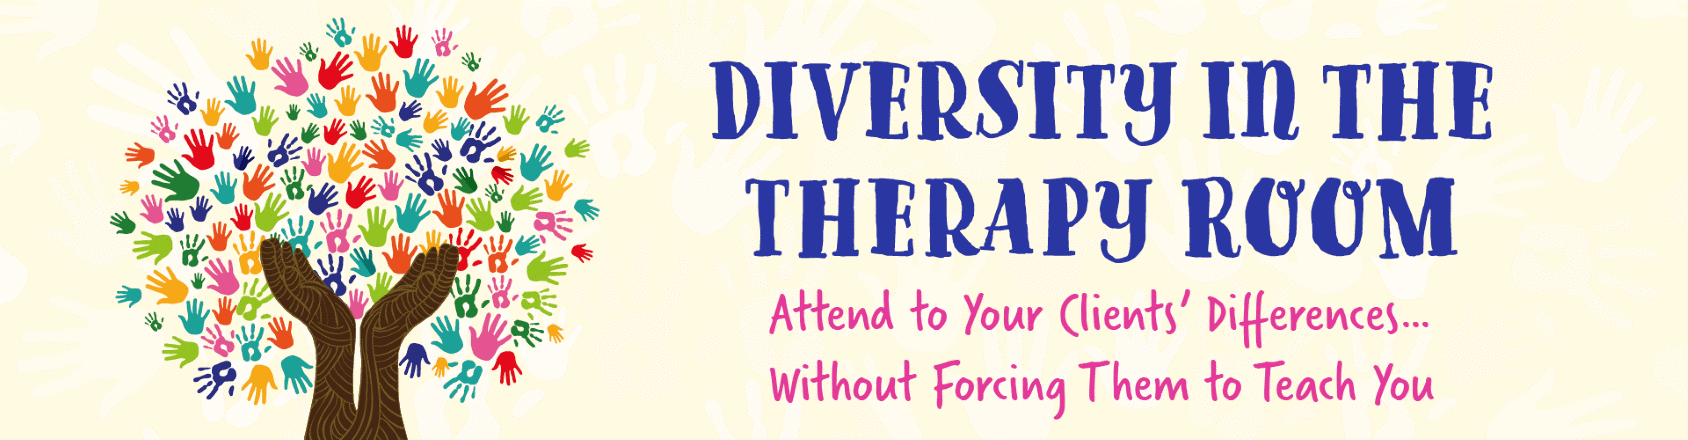 Diversity in the Therapy Room: Attend to Your Clients’ Differences…Without Forcing Them to Teach You 